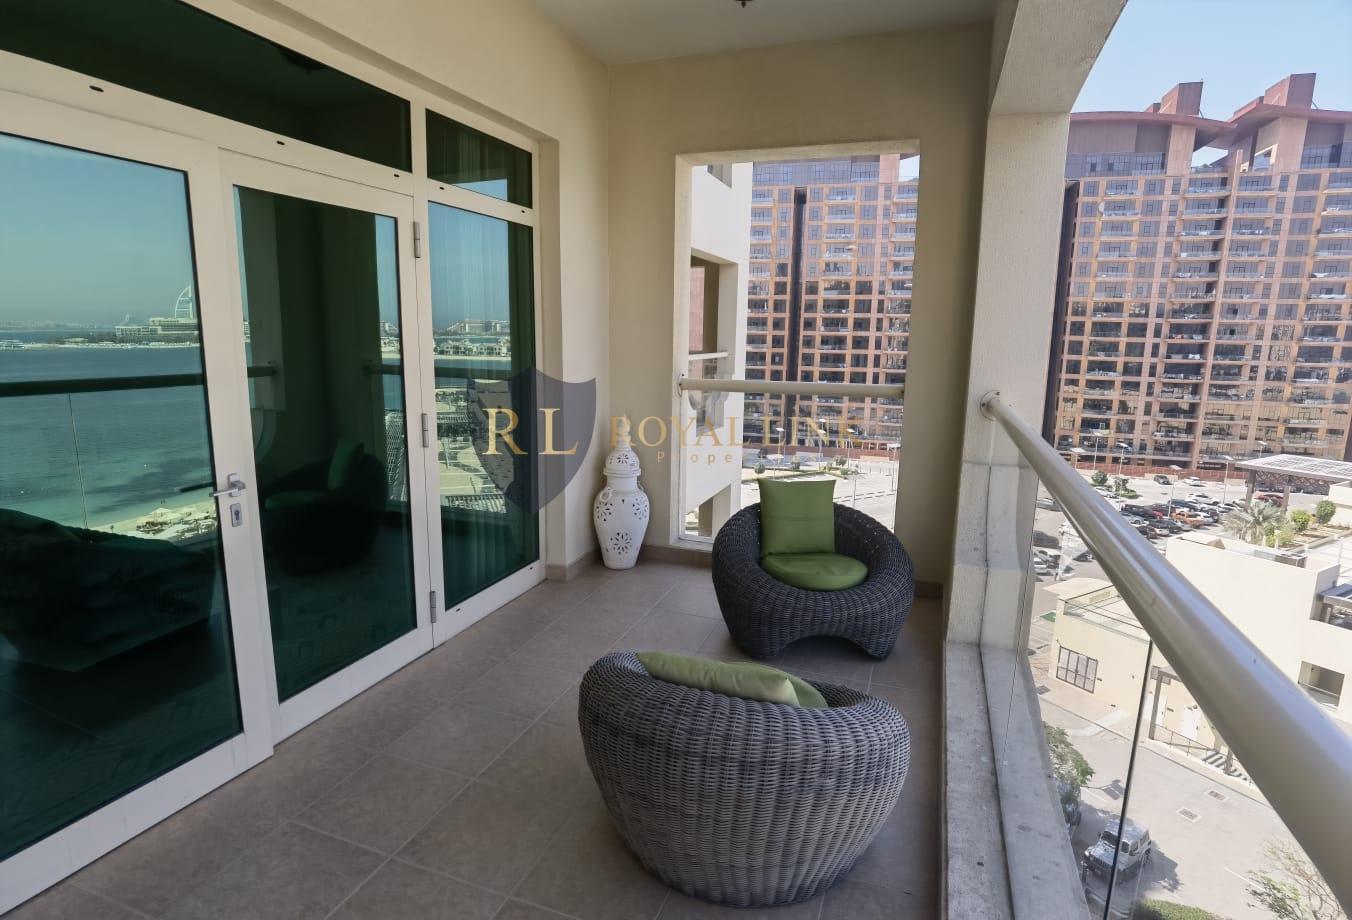 2 bed, 3 bath Apartment for rent in Al Das, Shoreline Apartments, Palm Jumeirah, Dubai for price AED 274000 yearly 